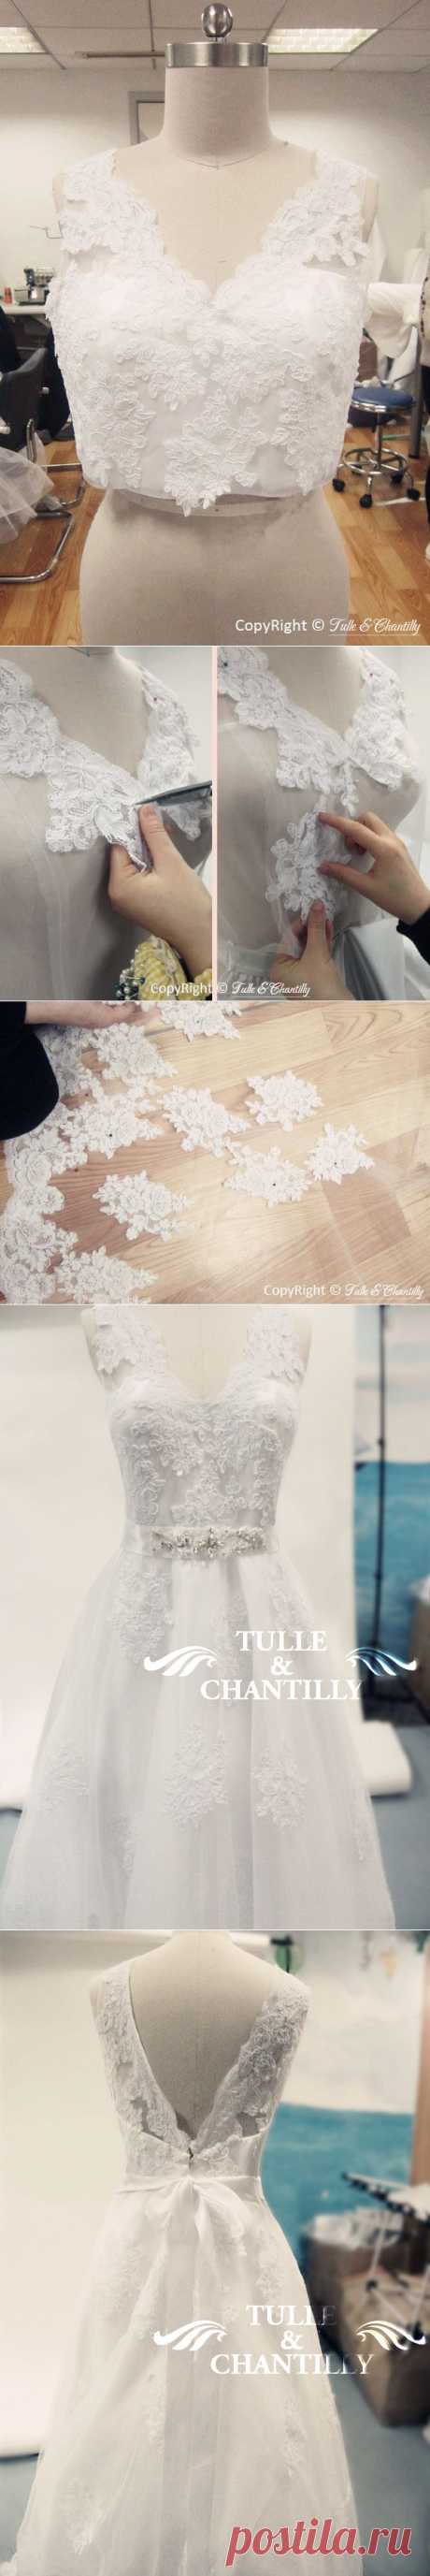 {Process Show Time} Vintage Lace Wedding Dress With Pretty Beaded Sash | TulleandChantilly.com